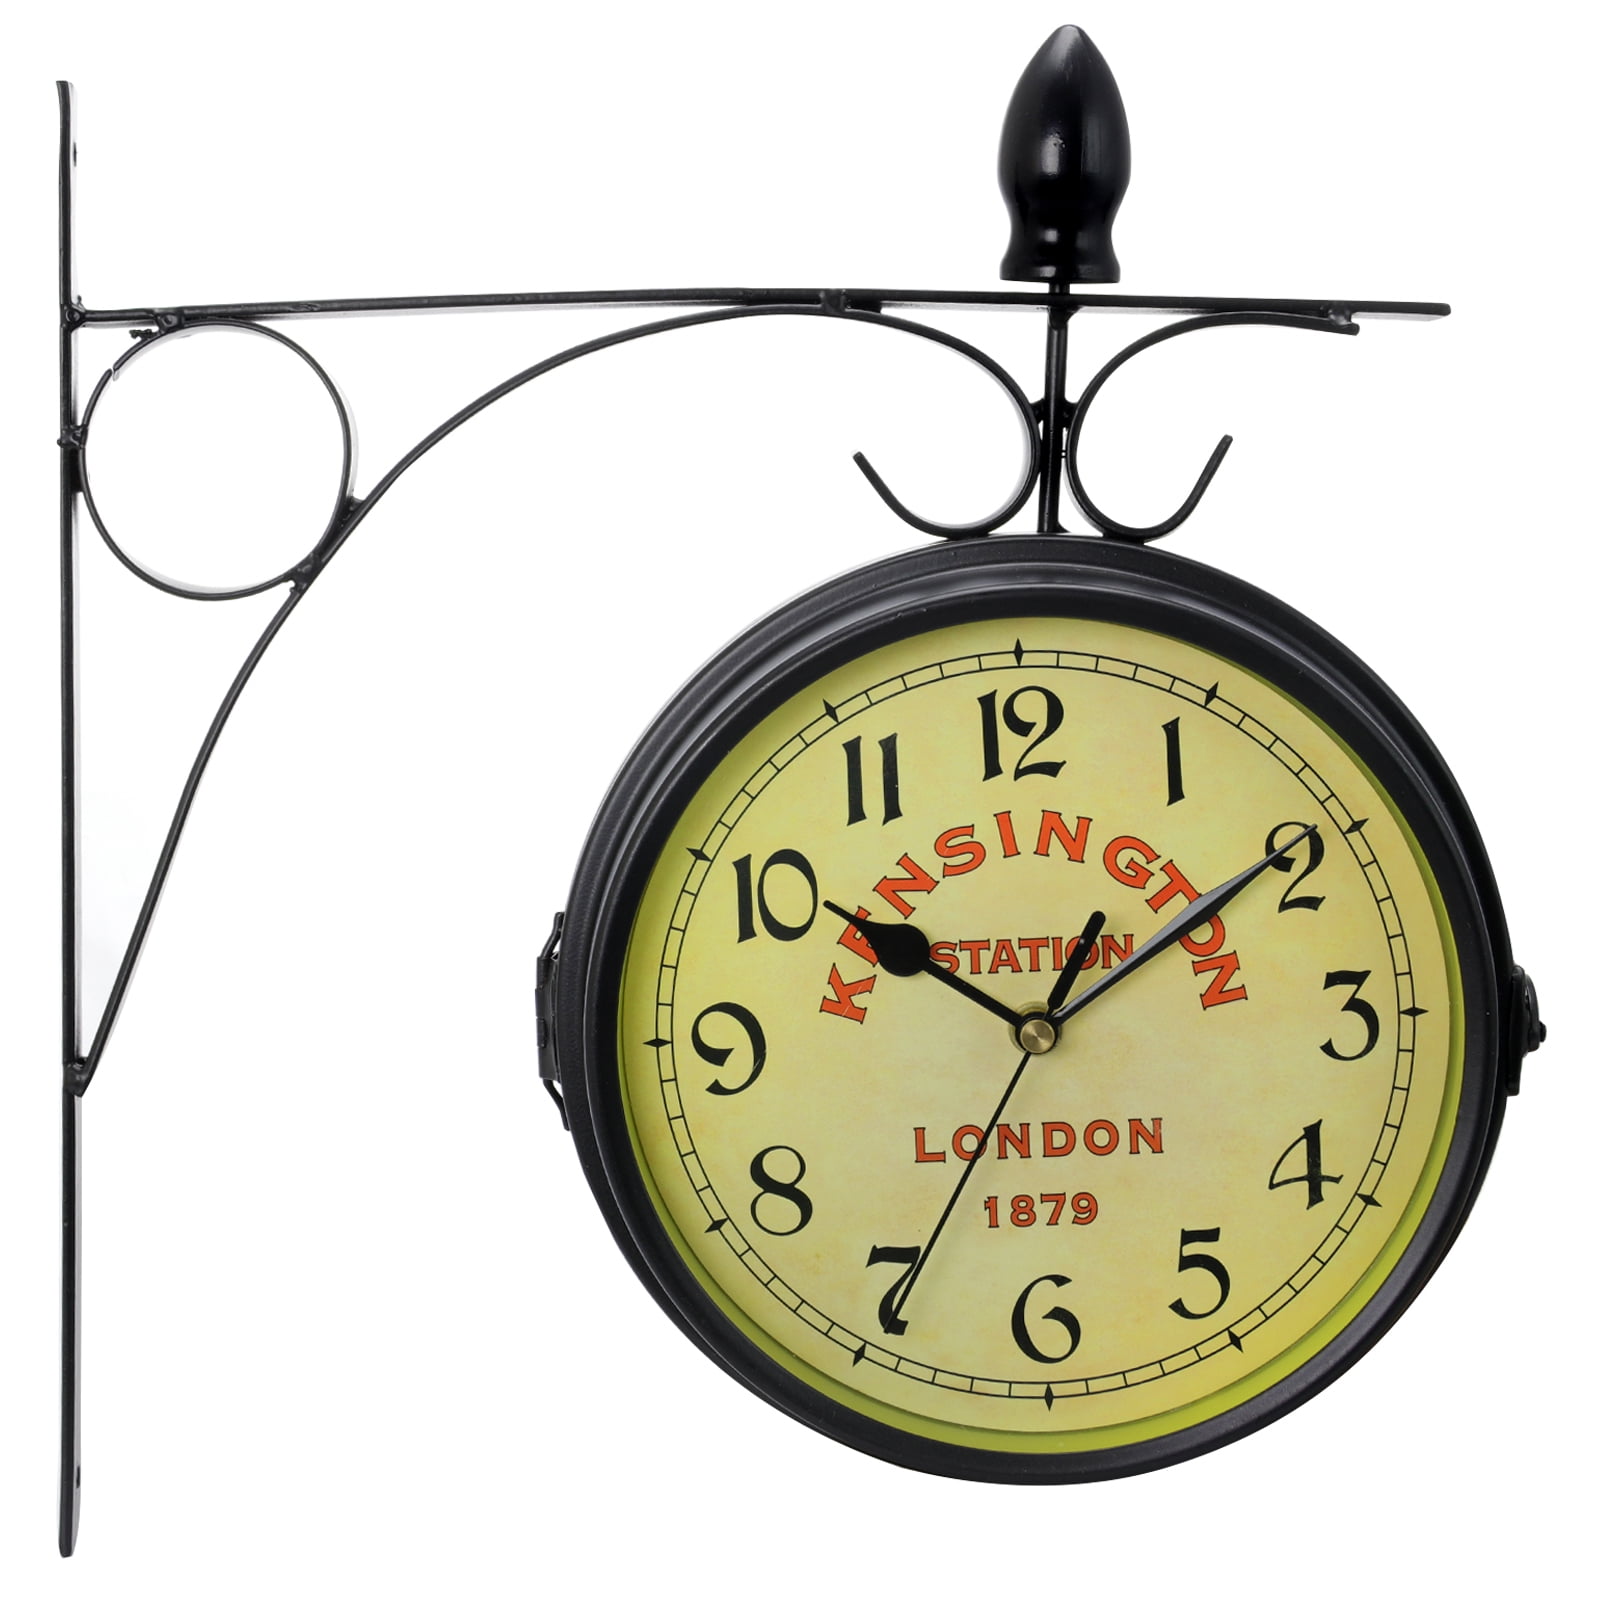 Antique Luxury Premium Double Sided Wall Clock Art Home Decor Station Clock Gift 